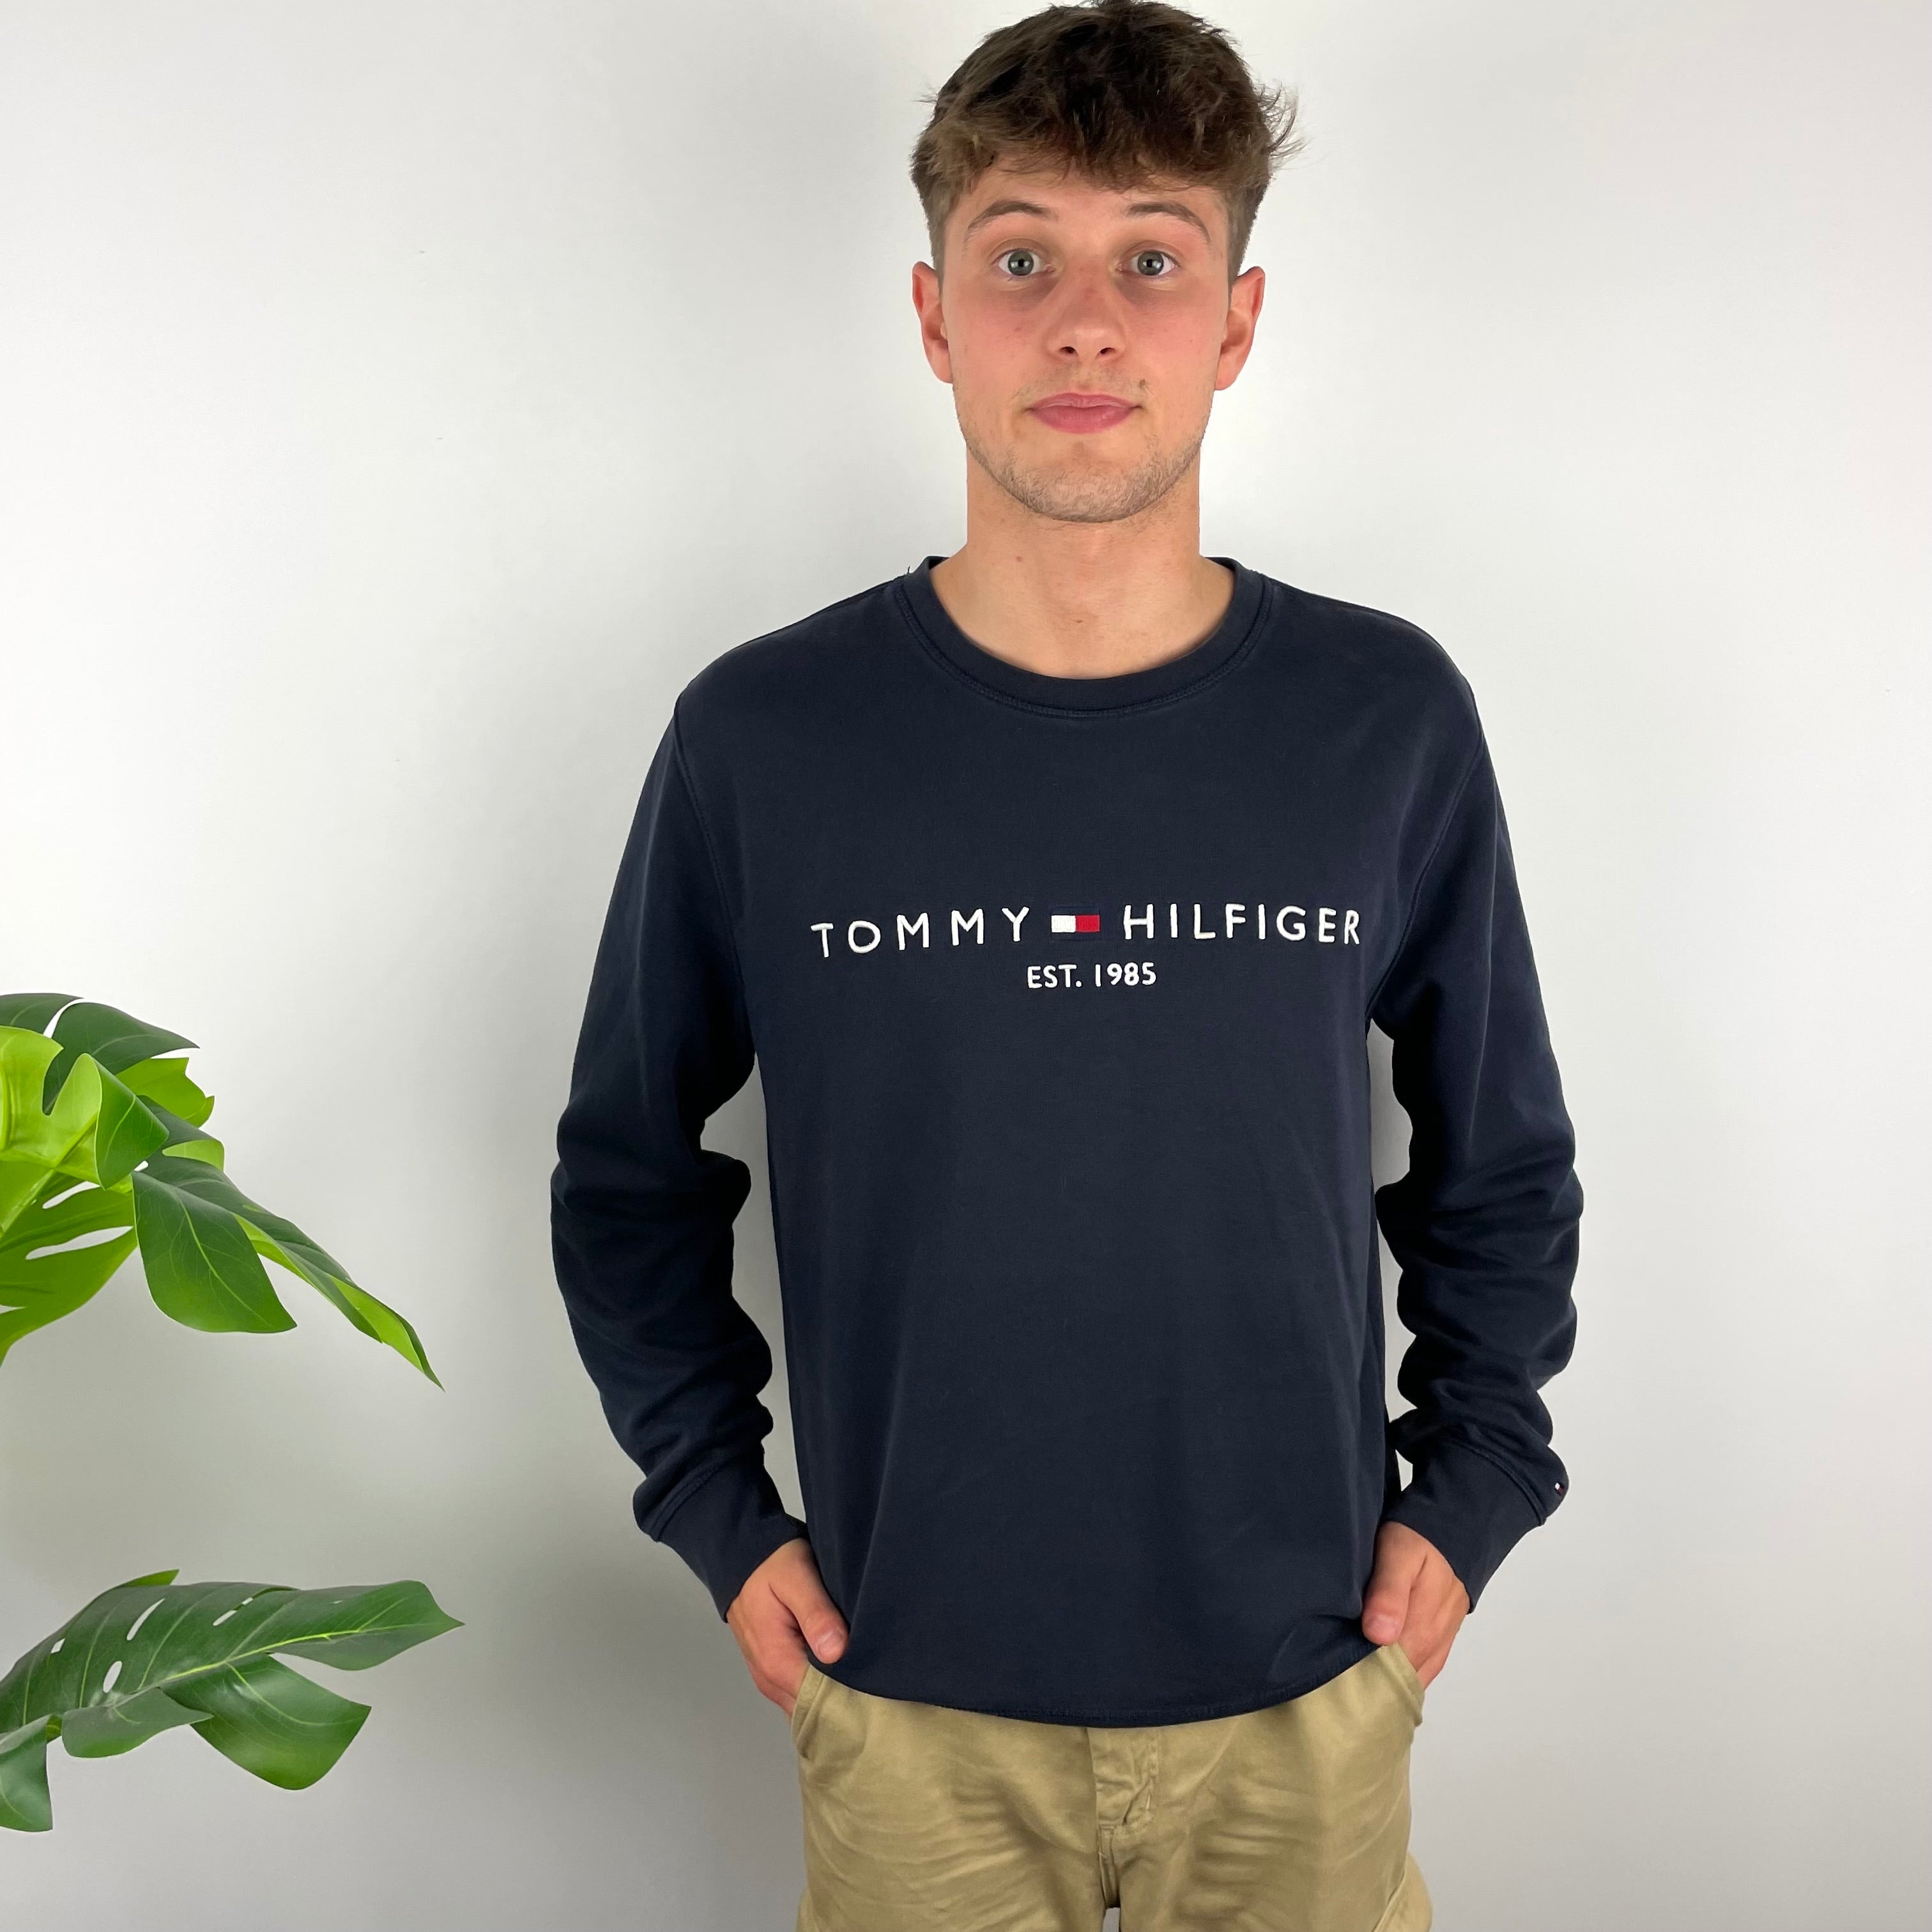 Tommy Hilfiger RARE Navy Embroidered Spell Out Sweatshirt (M)